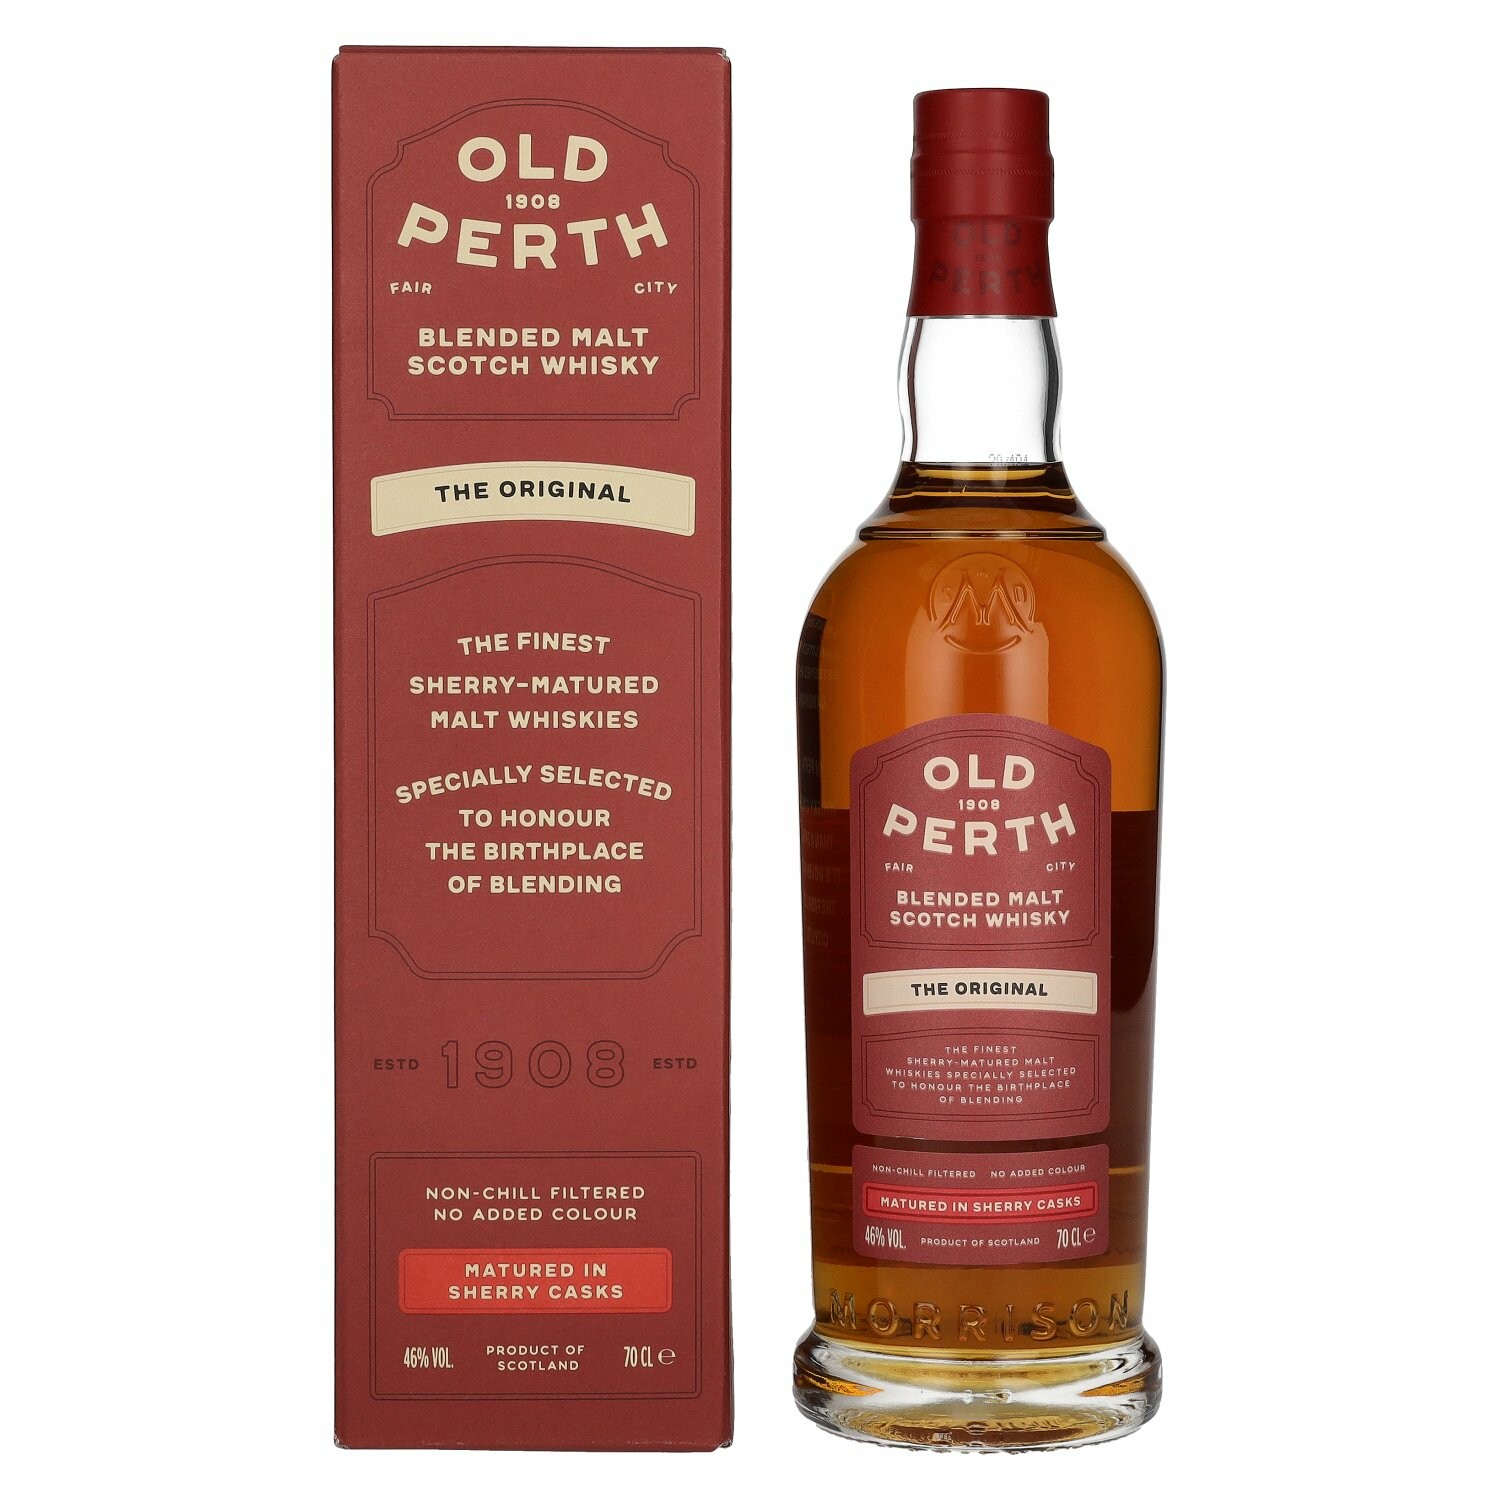 Old Perth The Original Blended Malt Scotch Whisky Sherry Casks 46% Vol. 0,7l in Giftbox